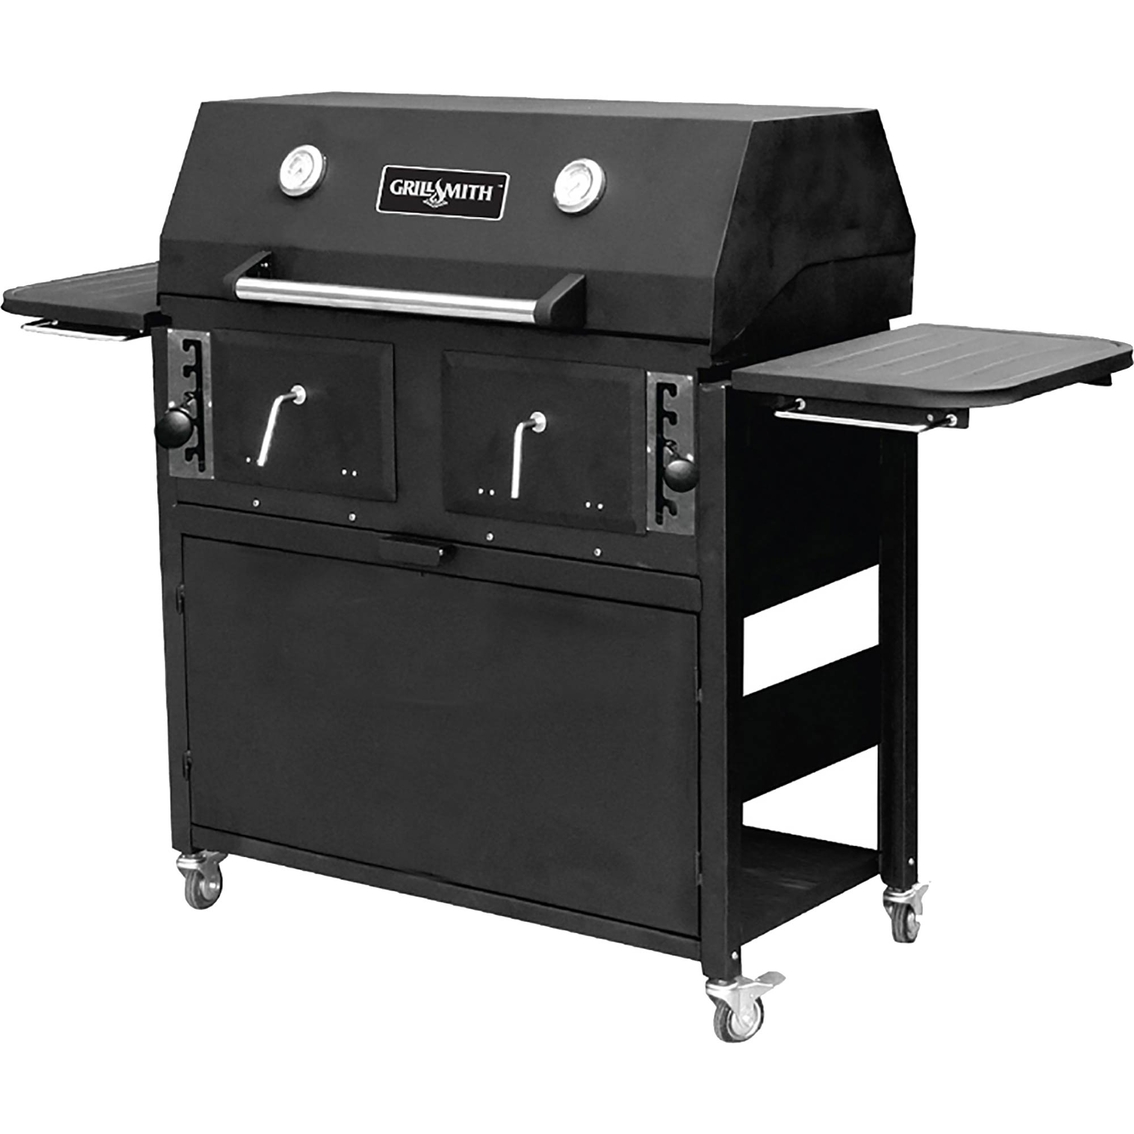 GrillSmith Rawhide Dual Zone Charcoal Grill - Image 1 of 7